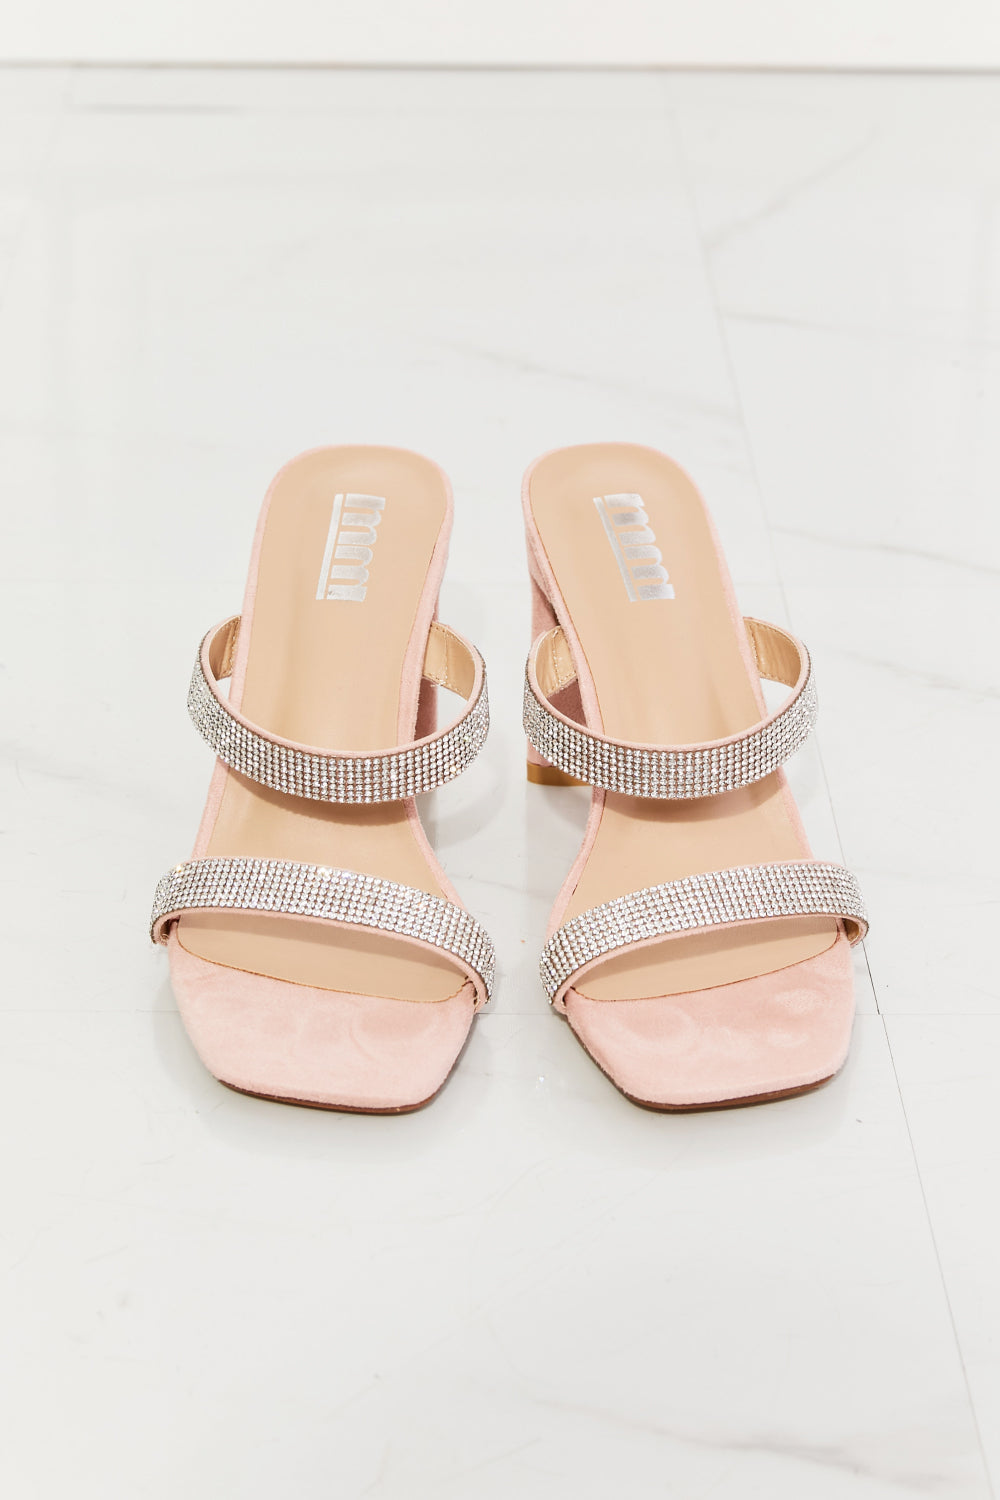 MMShoes Leave A Little Sparkle Rhinestone Block Heel Sandal in Pink - Ships from The US - women's sandals at TFC&H Co.